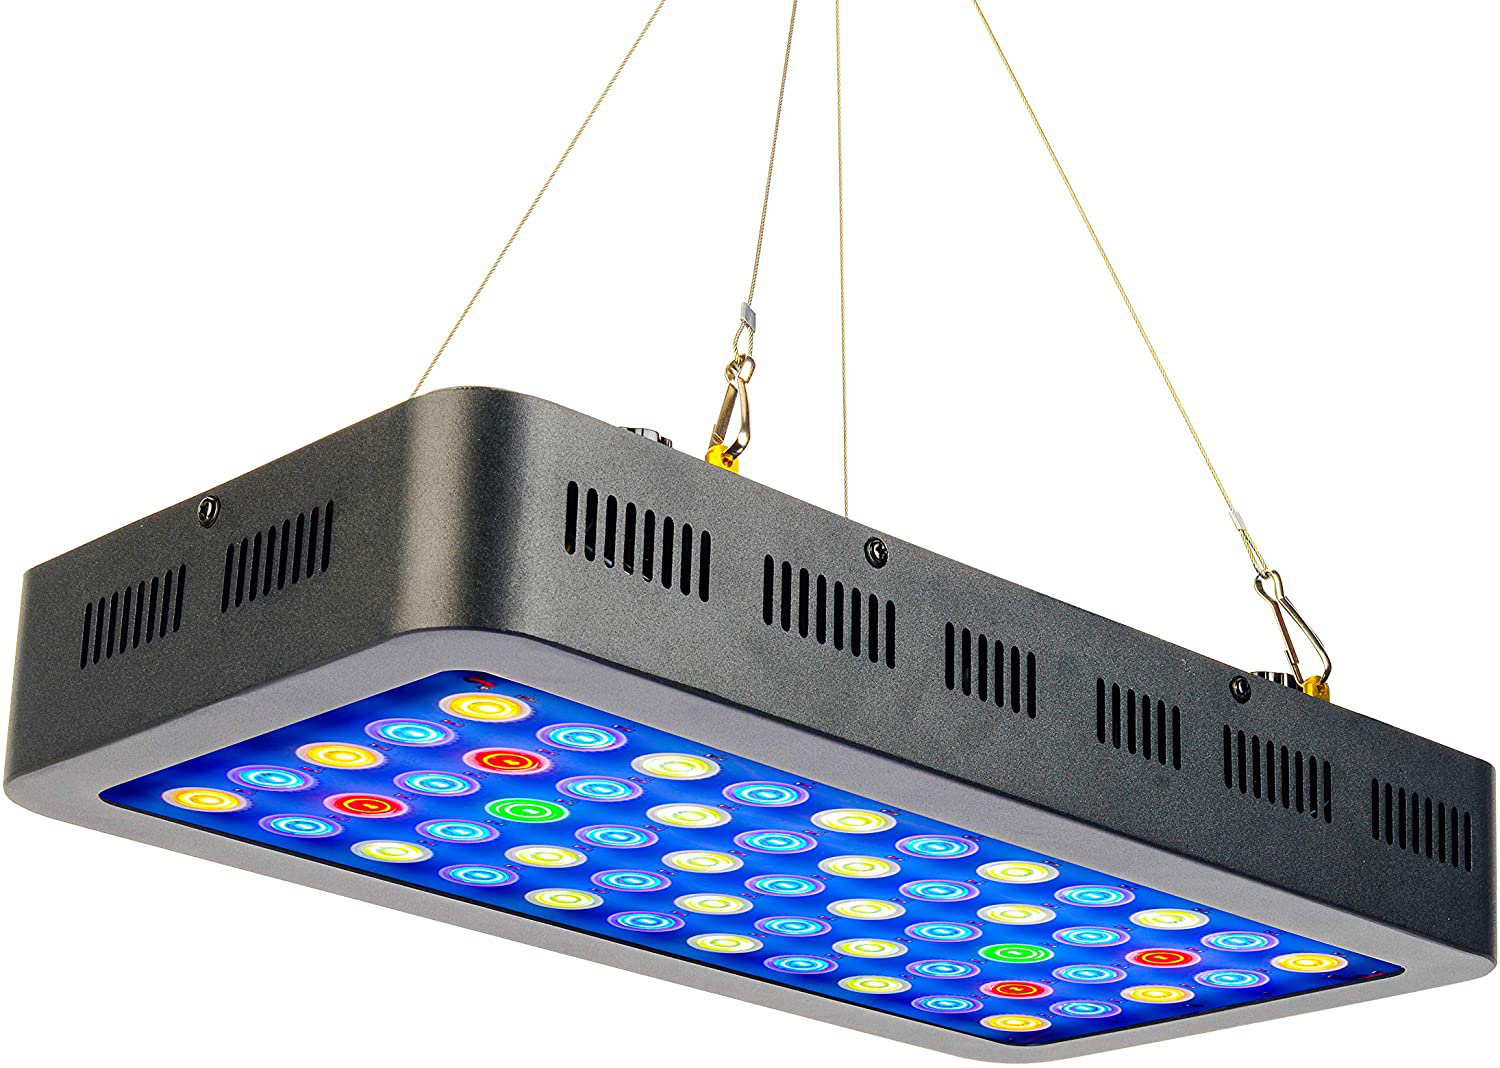 GYIELDS Aquarium Light Full Spectrum Dimmable, 165W 5 Colors LED Coral Reef Light for 30 Gallon Saltwater Freshwater Fish Tank LPS SPS